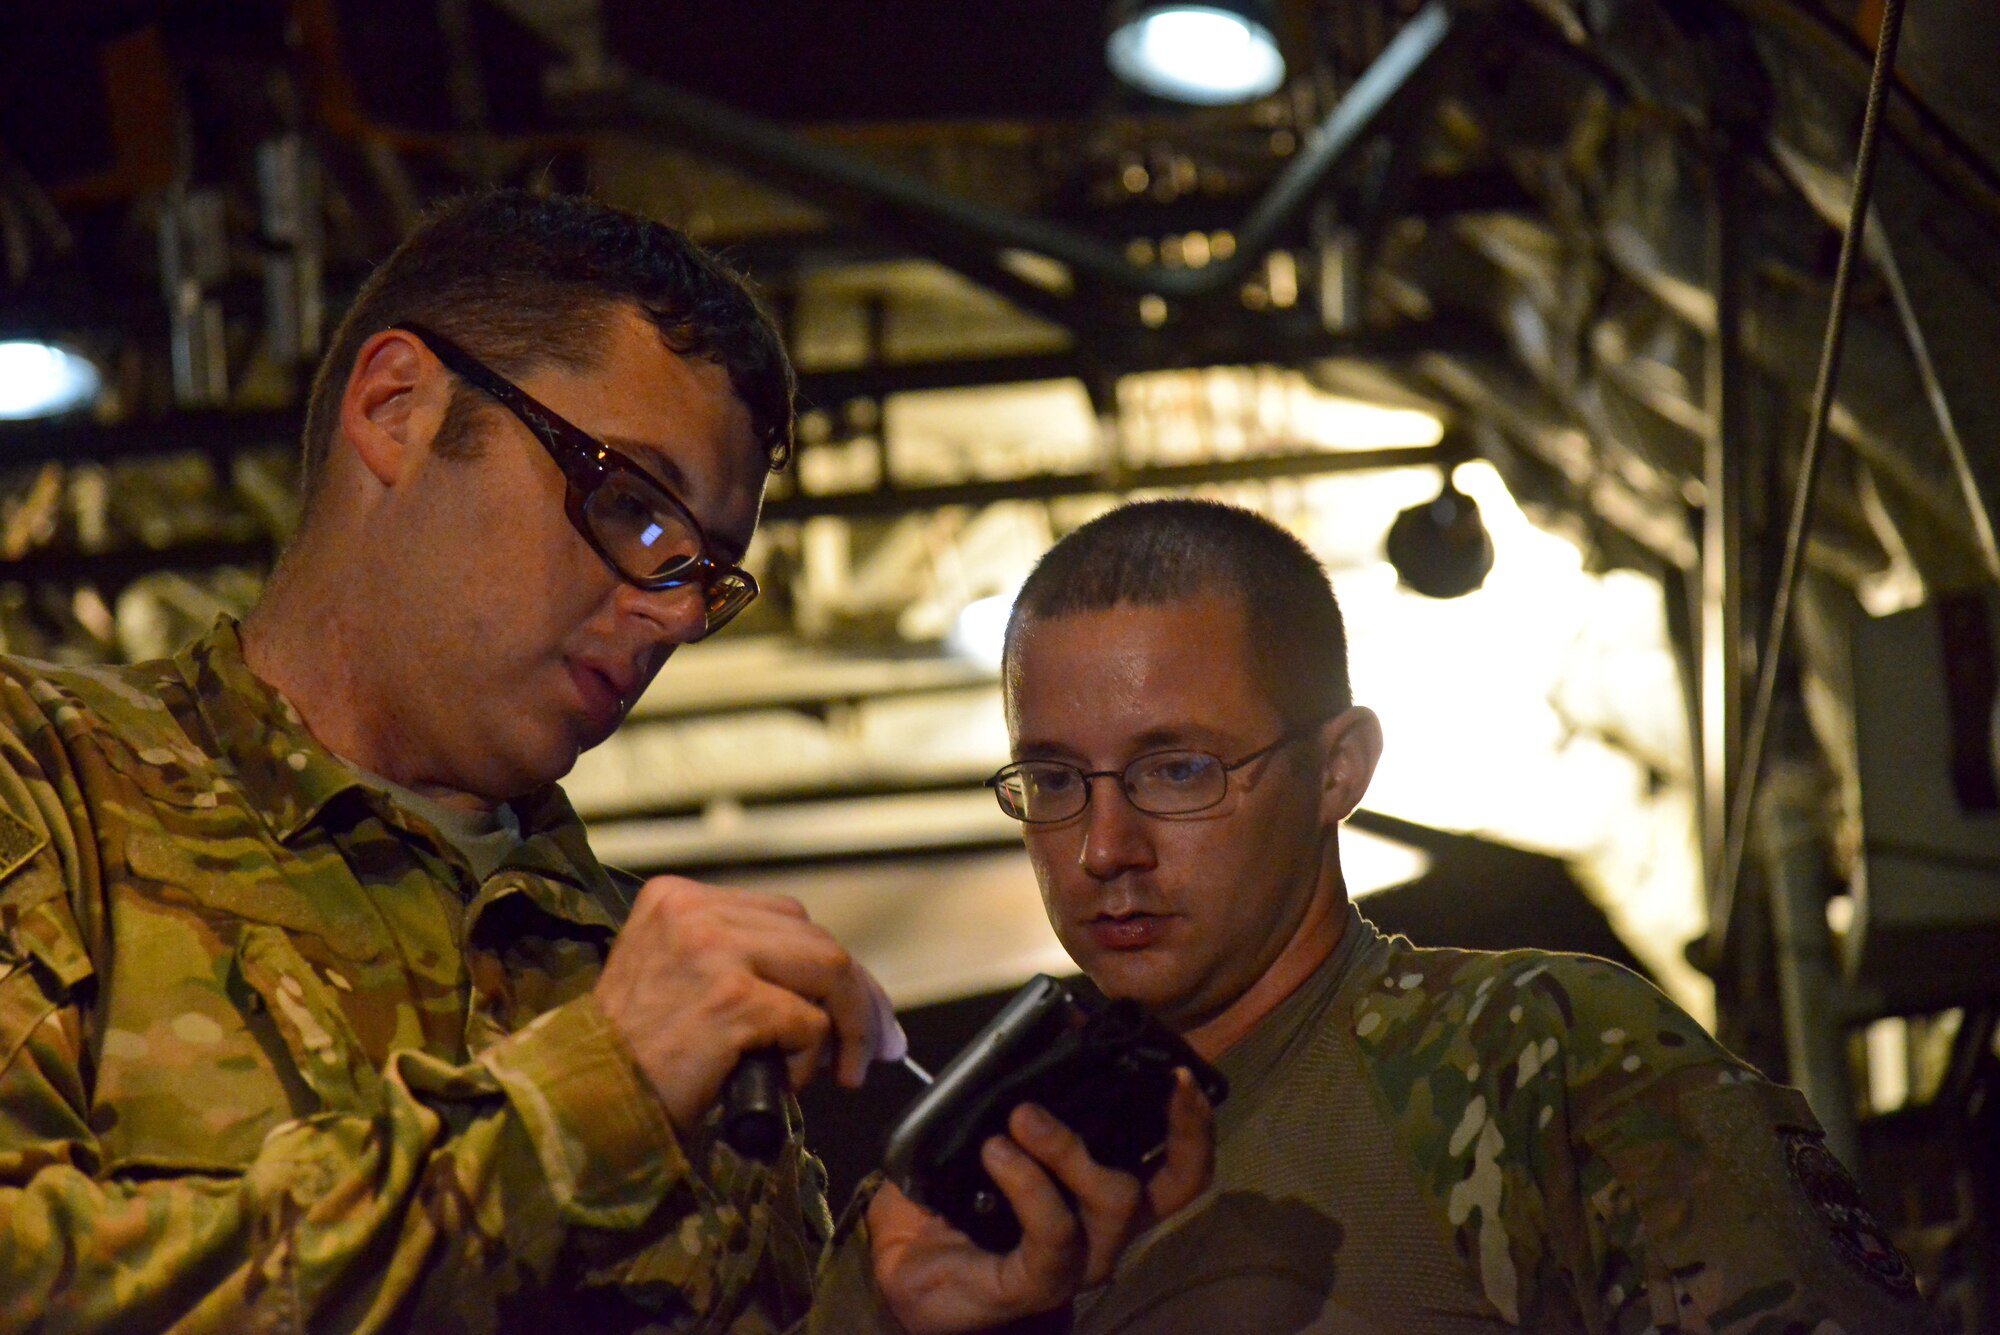 Staff Sgt. Ricky Davis and Tech Sgt. Wyatt Lewis, 746th Expeditionary Airlift Squadron crew chiefs, complete final calculations prior to loading a 23,000 pound P-19 Aircraft Rescue Fire Fighting vehicle onto a C-130J Hercules October 12, 2015 at Al Udeid Air Base, Qatar. Aircrew from the 746th EAS received help from Airmen of the 8th Expeditionary Air Mobility Squadron to load the P-19 ARFF vehicle that will be used at a Forward Operating Base. (U.S. Air Force photo/Staff Sgt. Alexandre Montes)